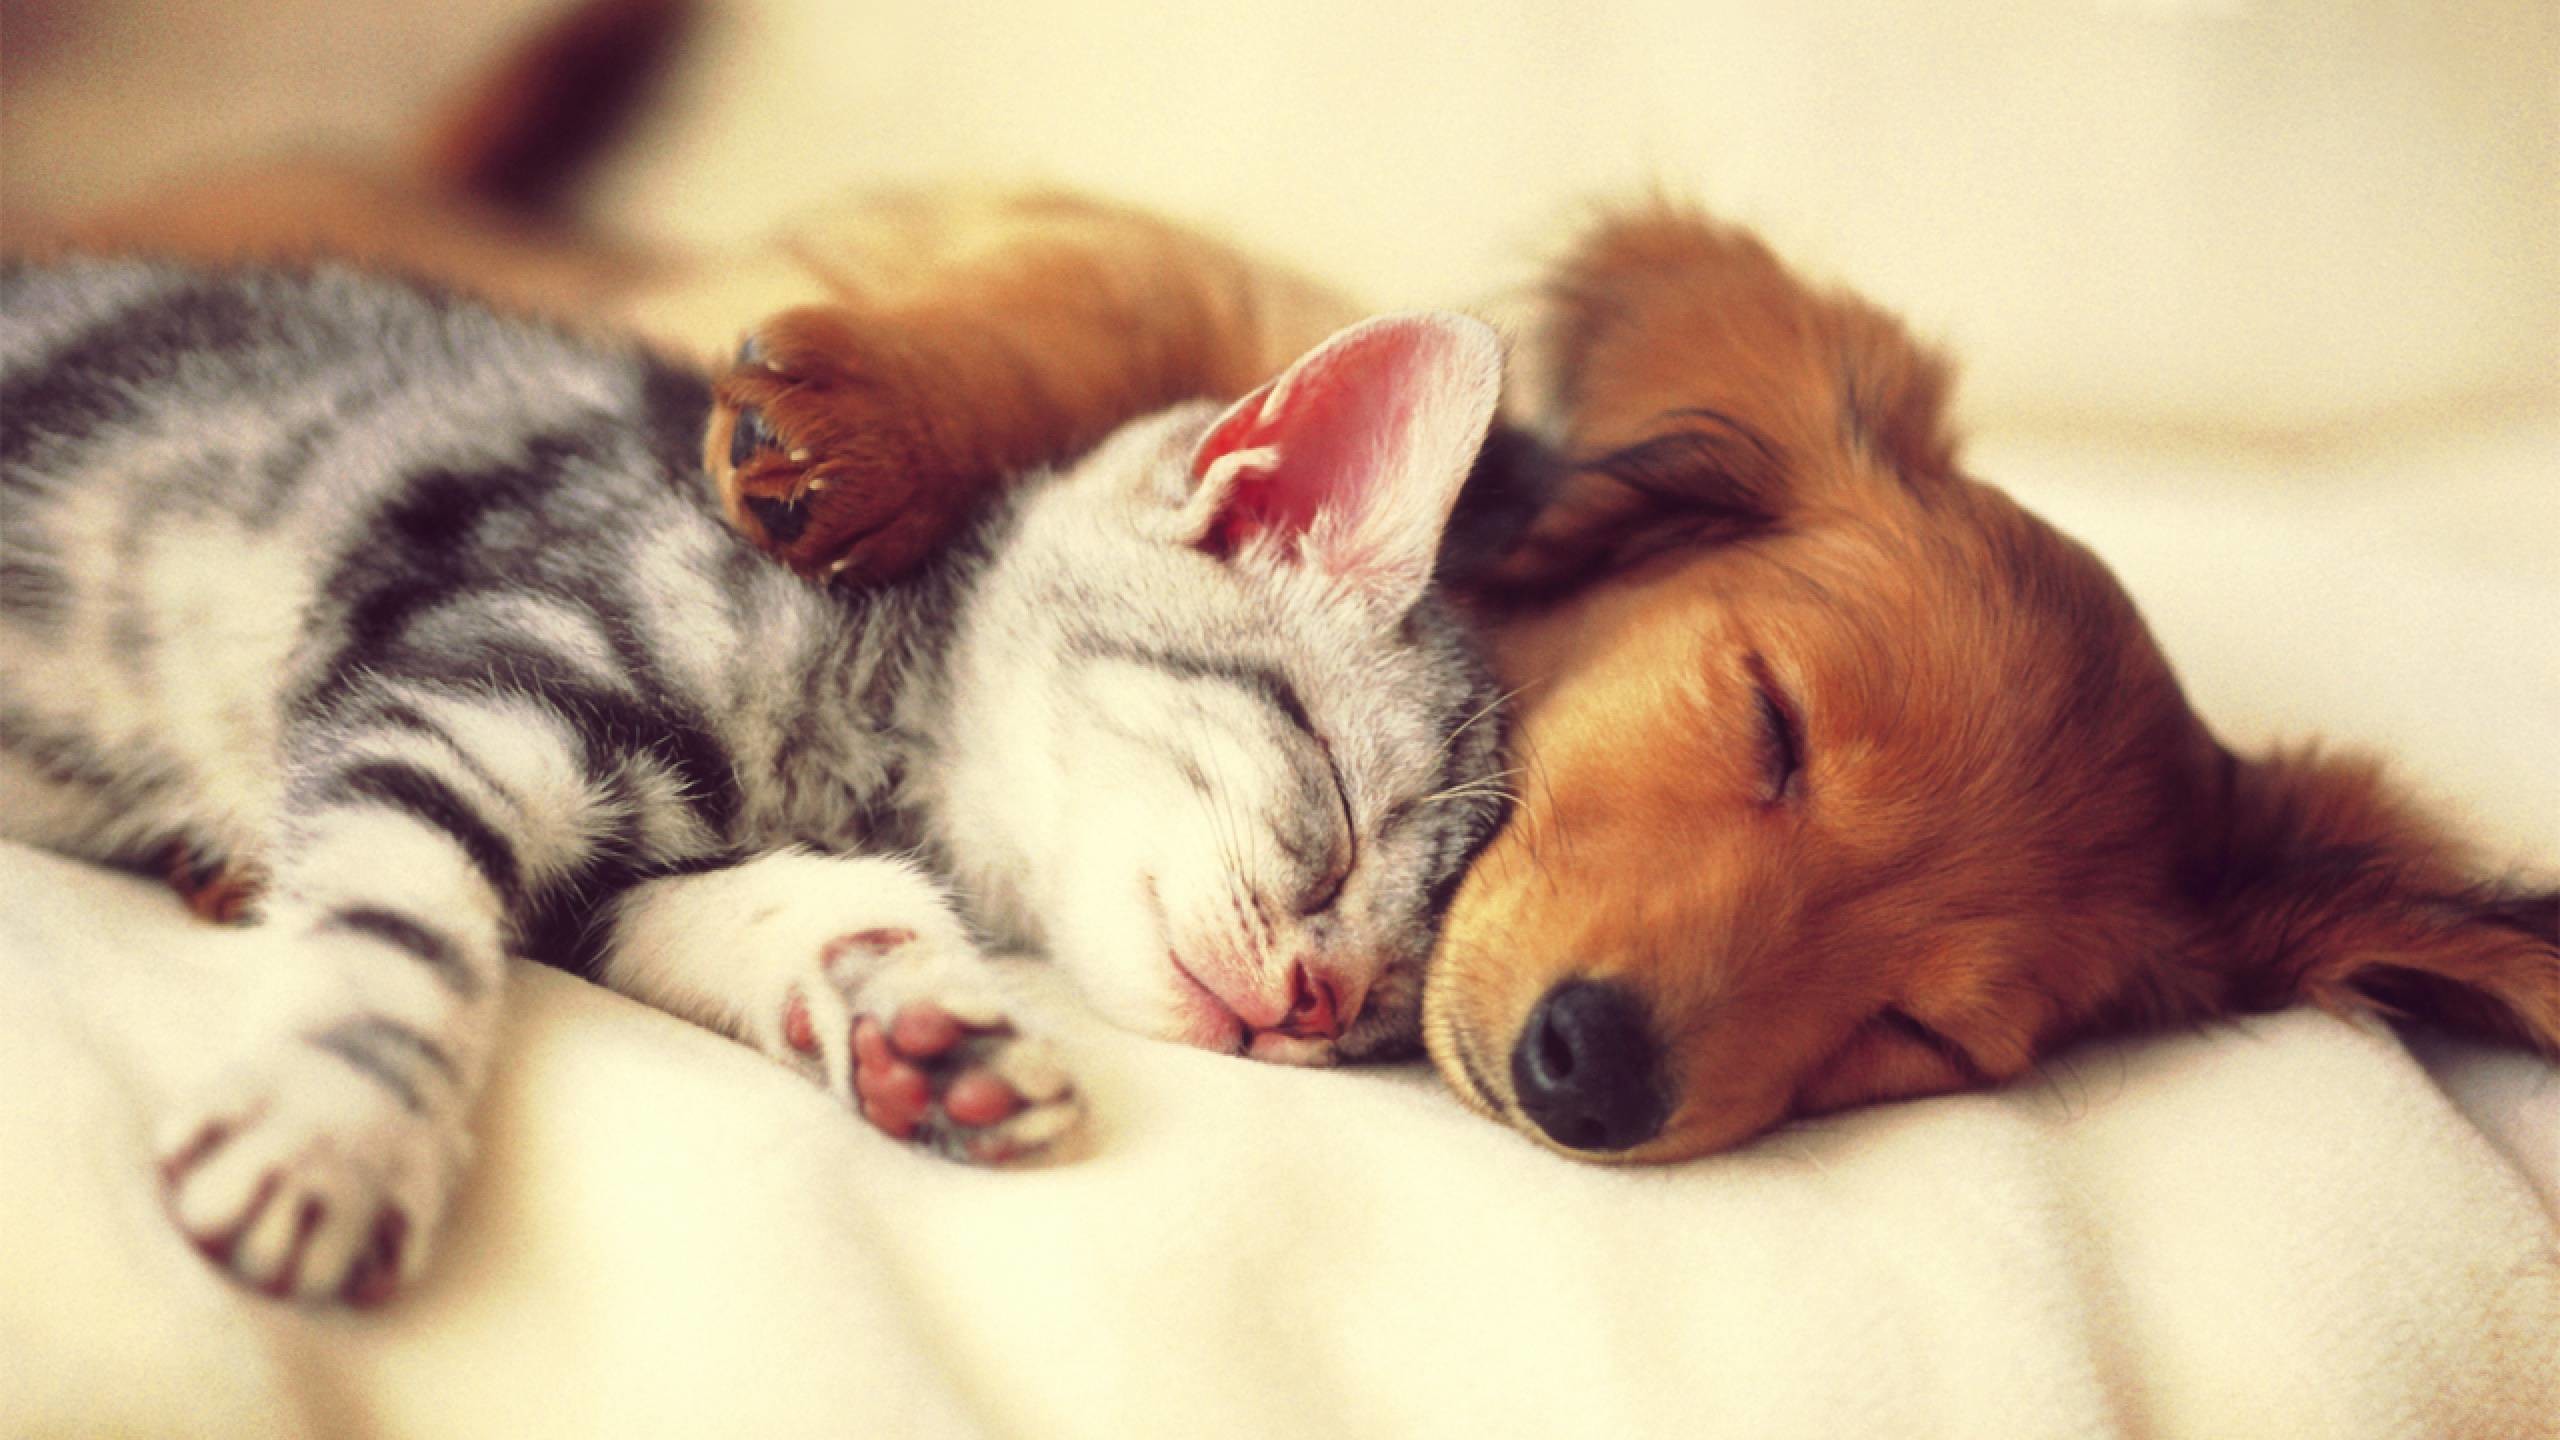 2560x1440 Dog And Cat Wallpapers Photo